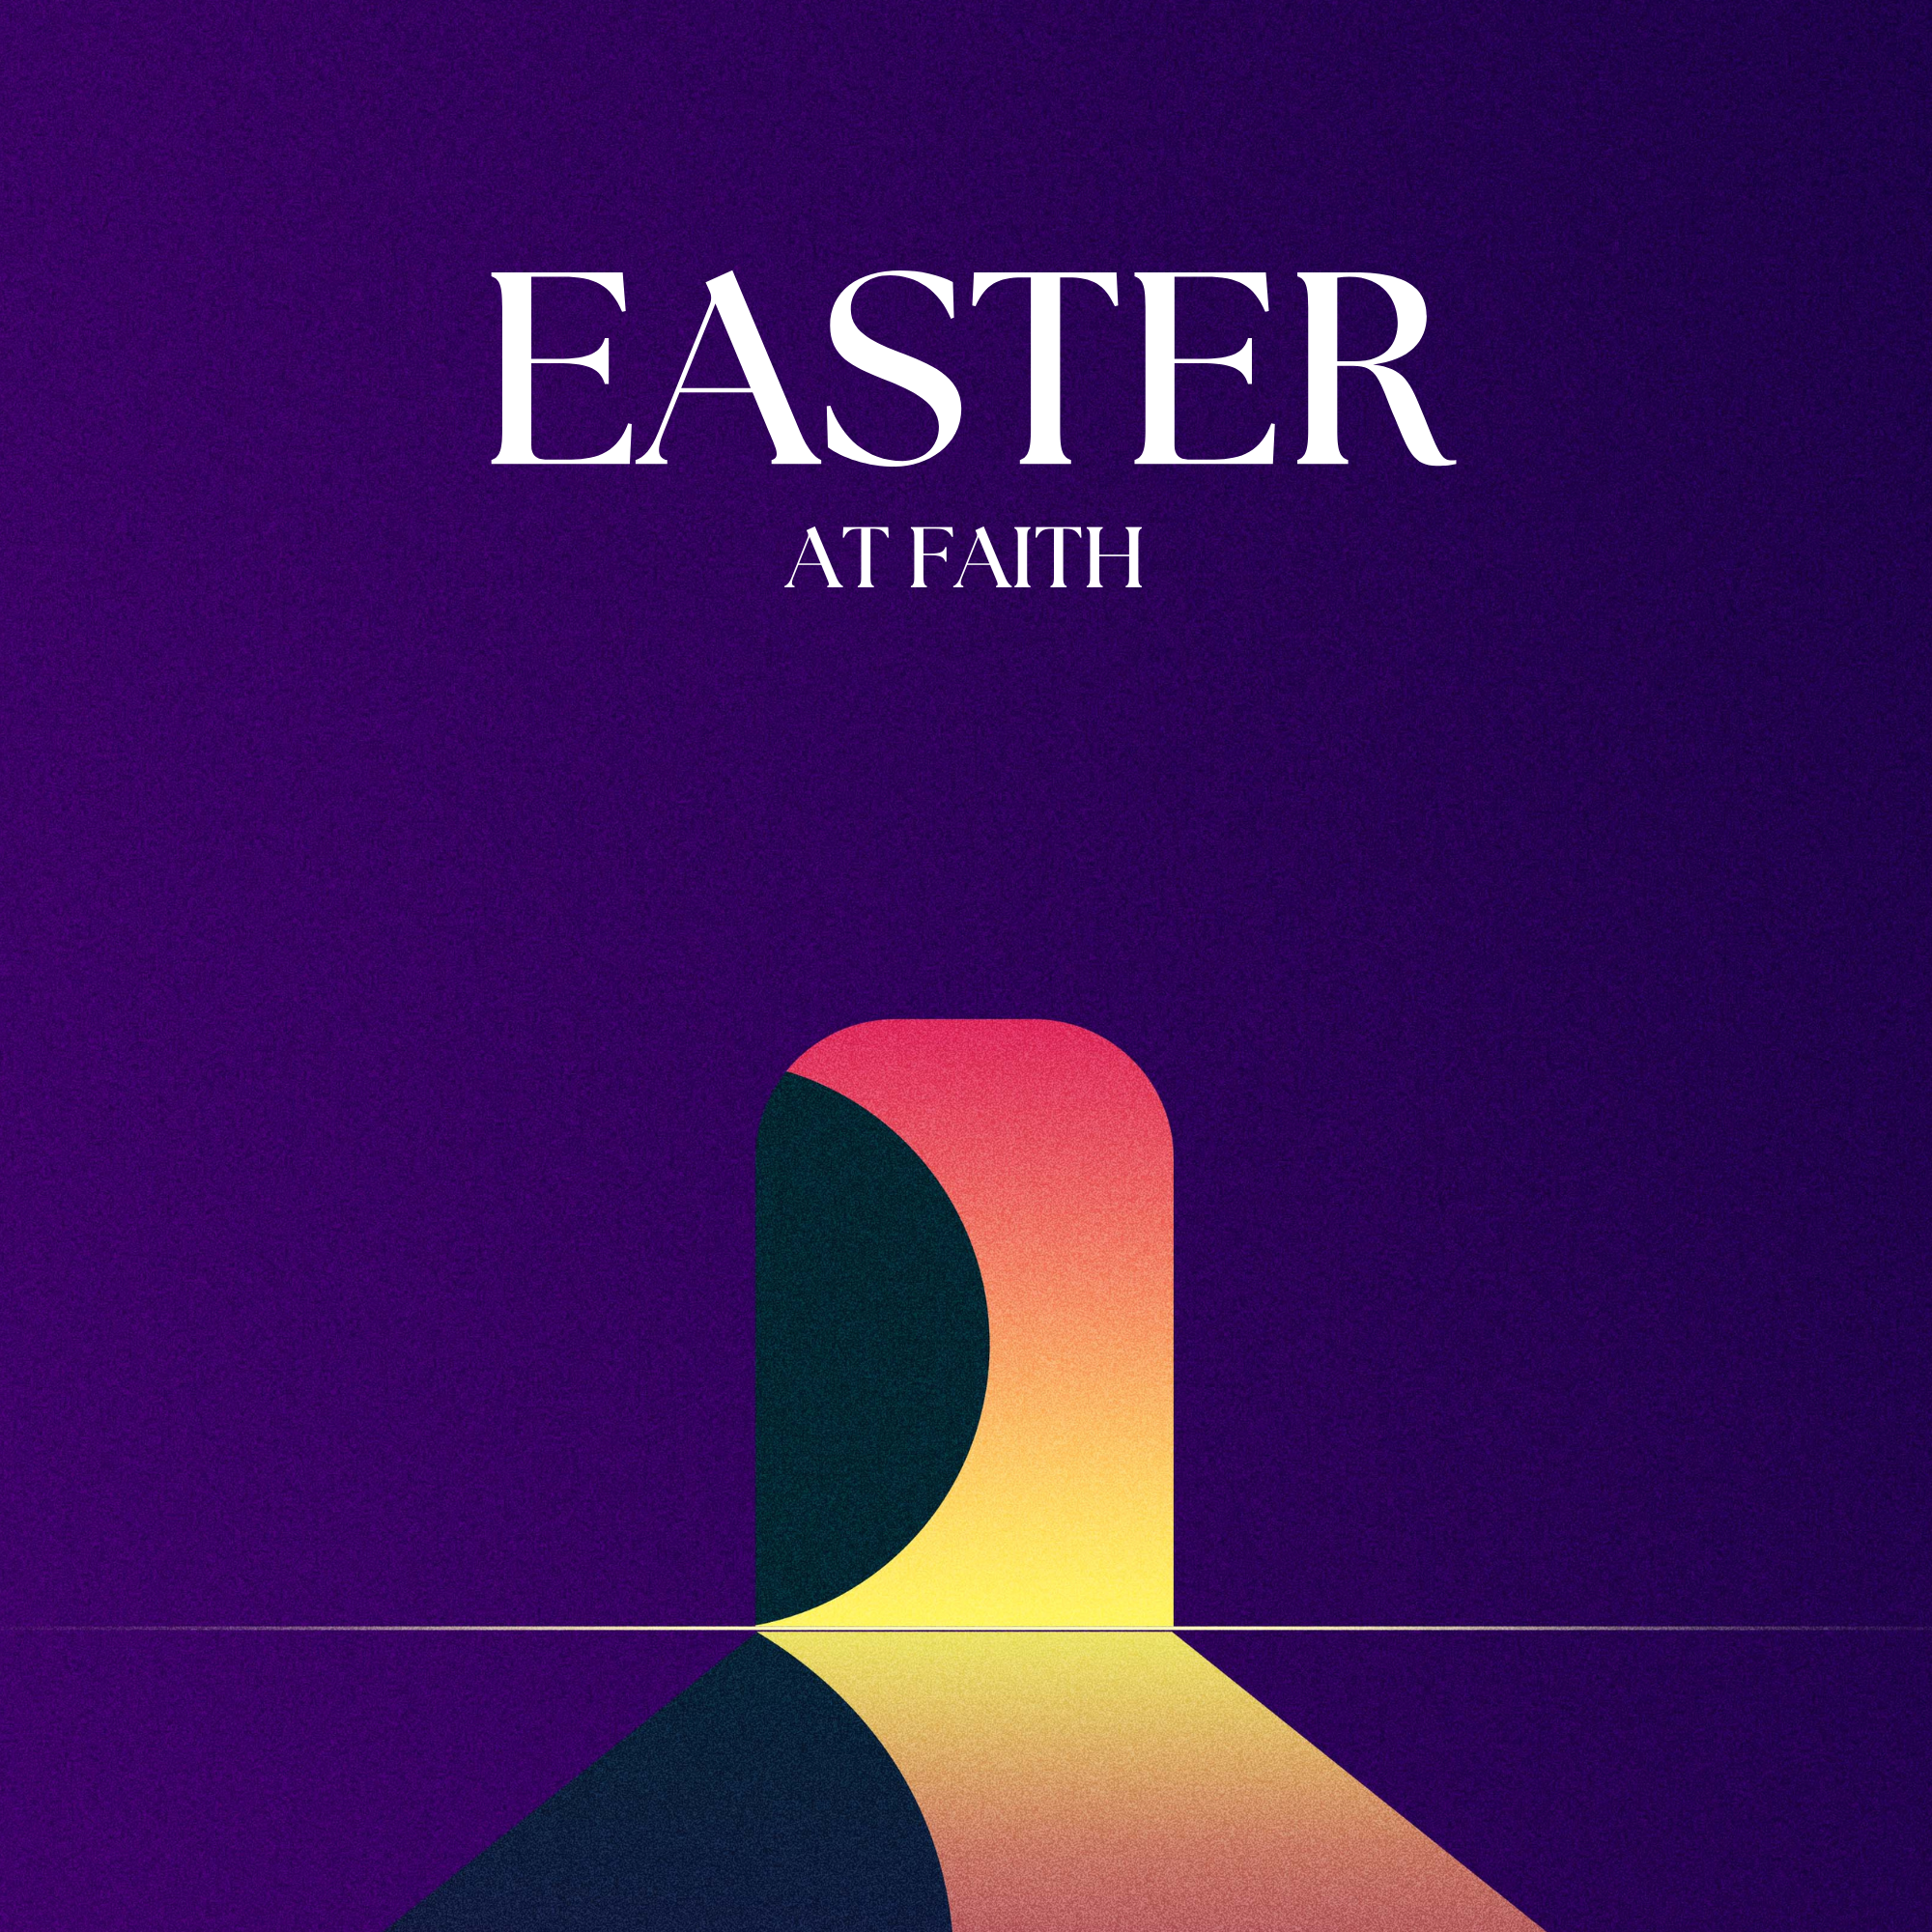 Easter at Faith Poster (2000 x 2000 px)